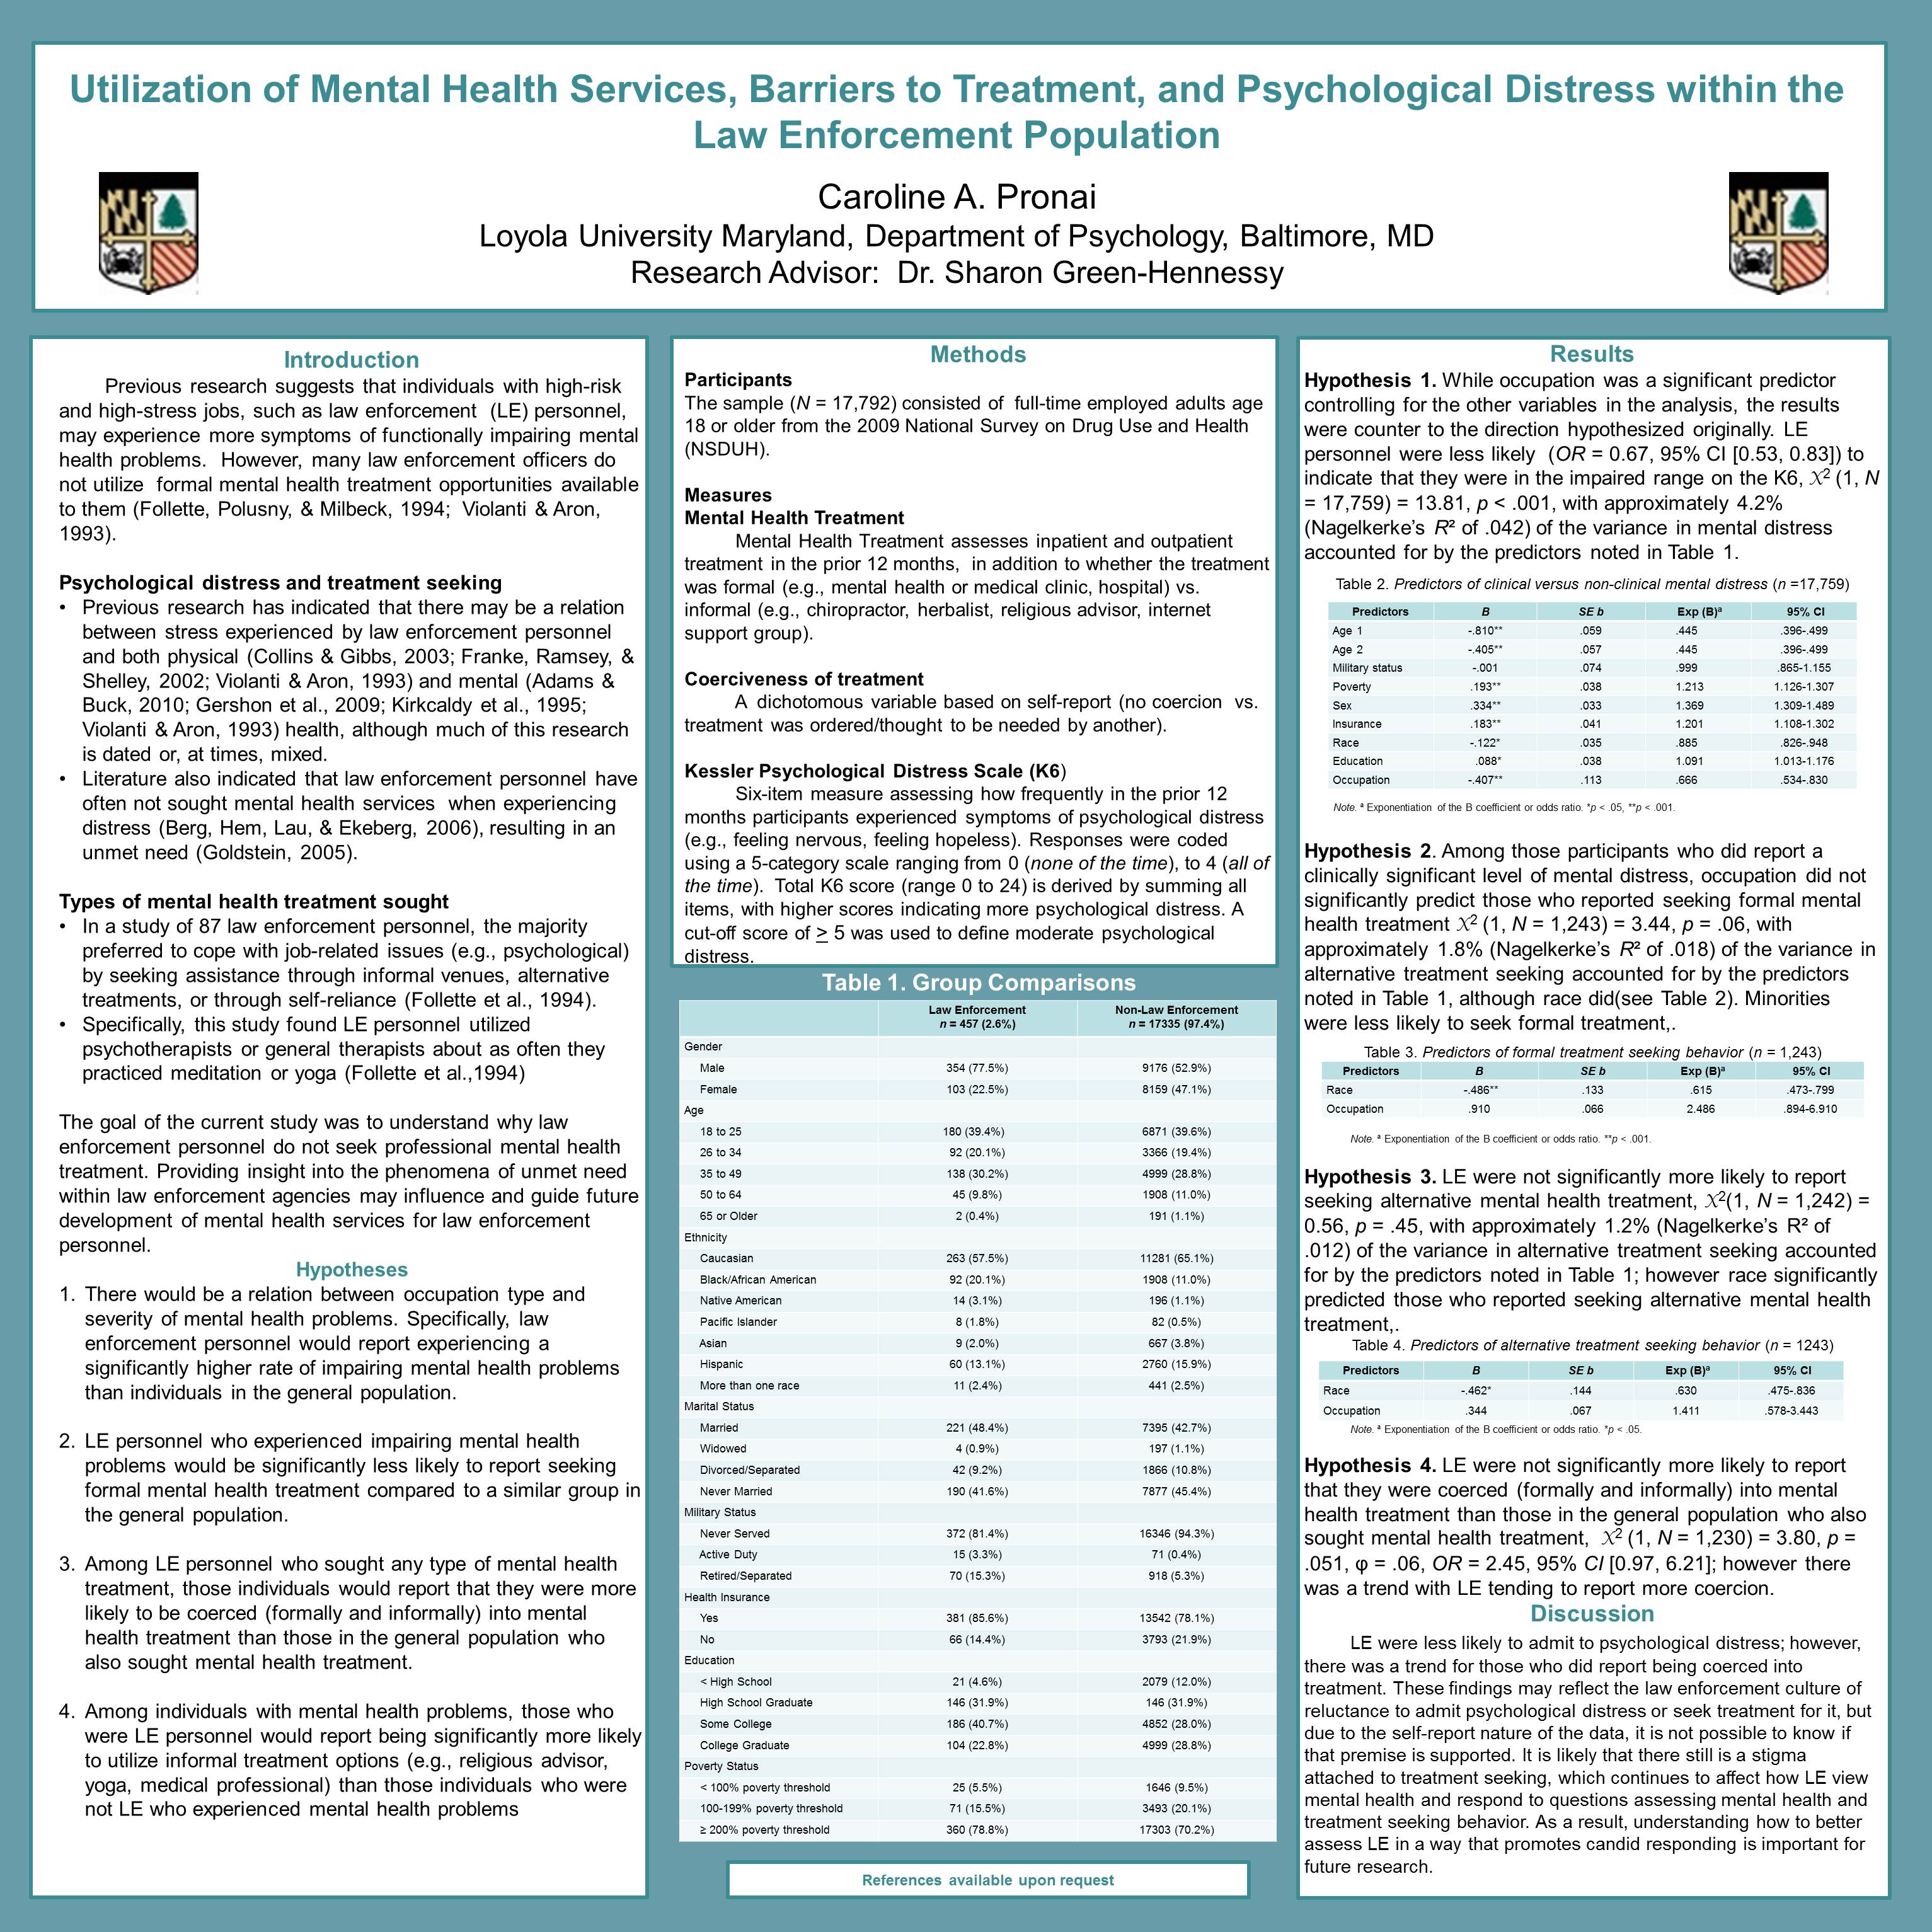 Enlarged poster image: Utilization of Mental Health Services, Barriers to Treatment, and Psychological Distress within the Law Enforcement Population